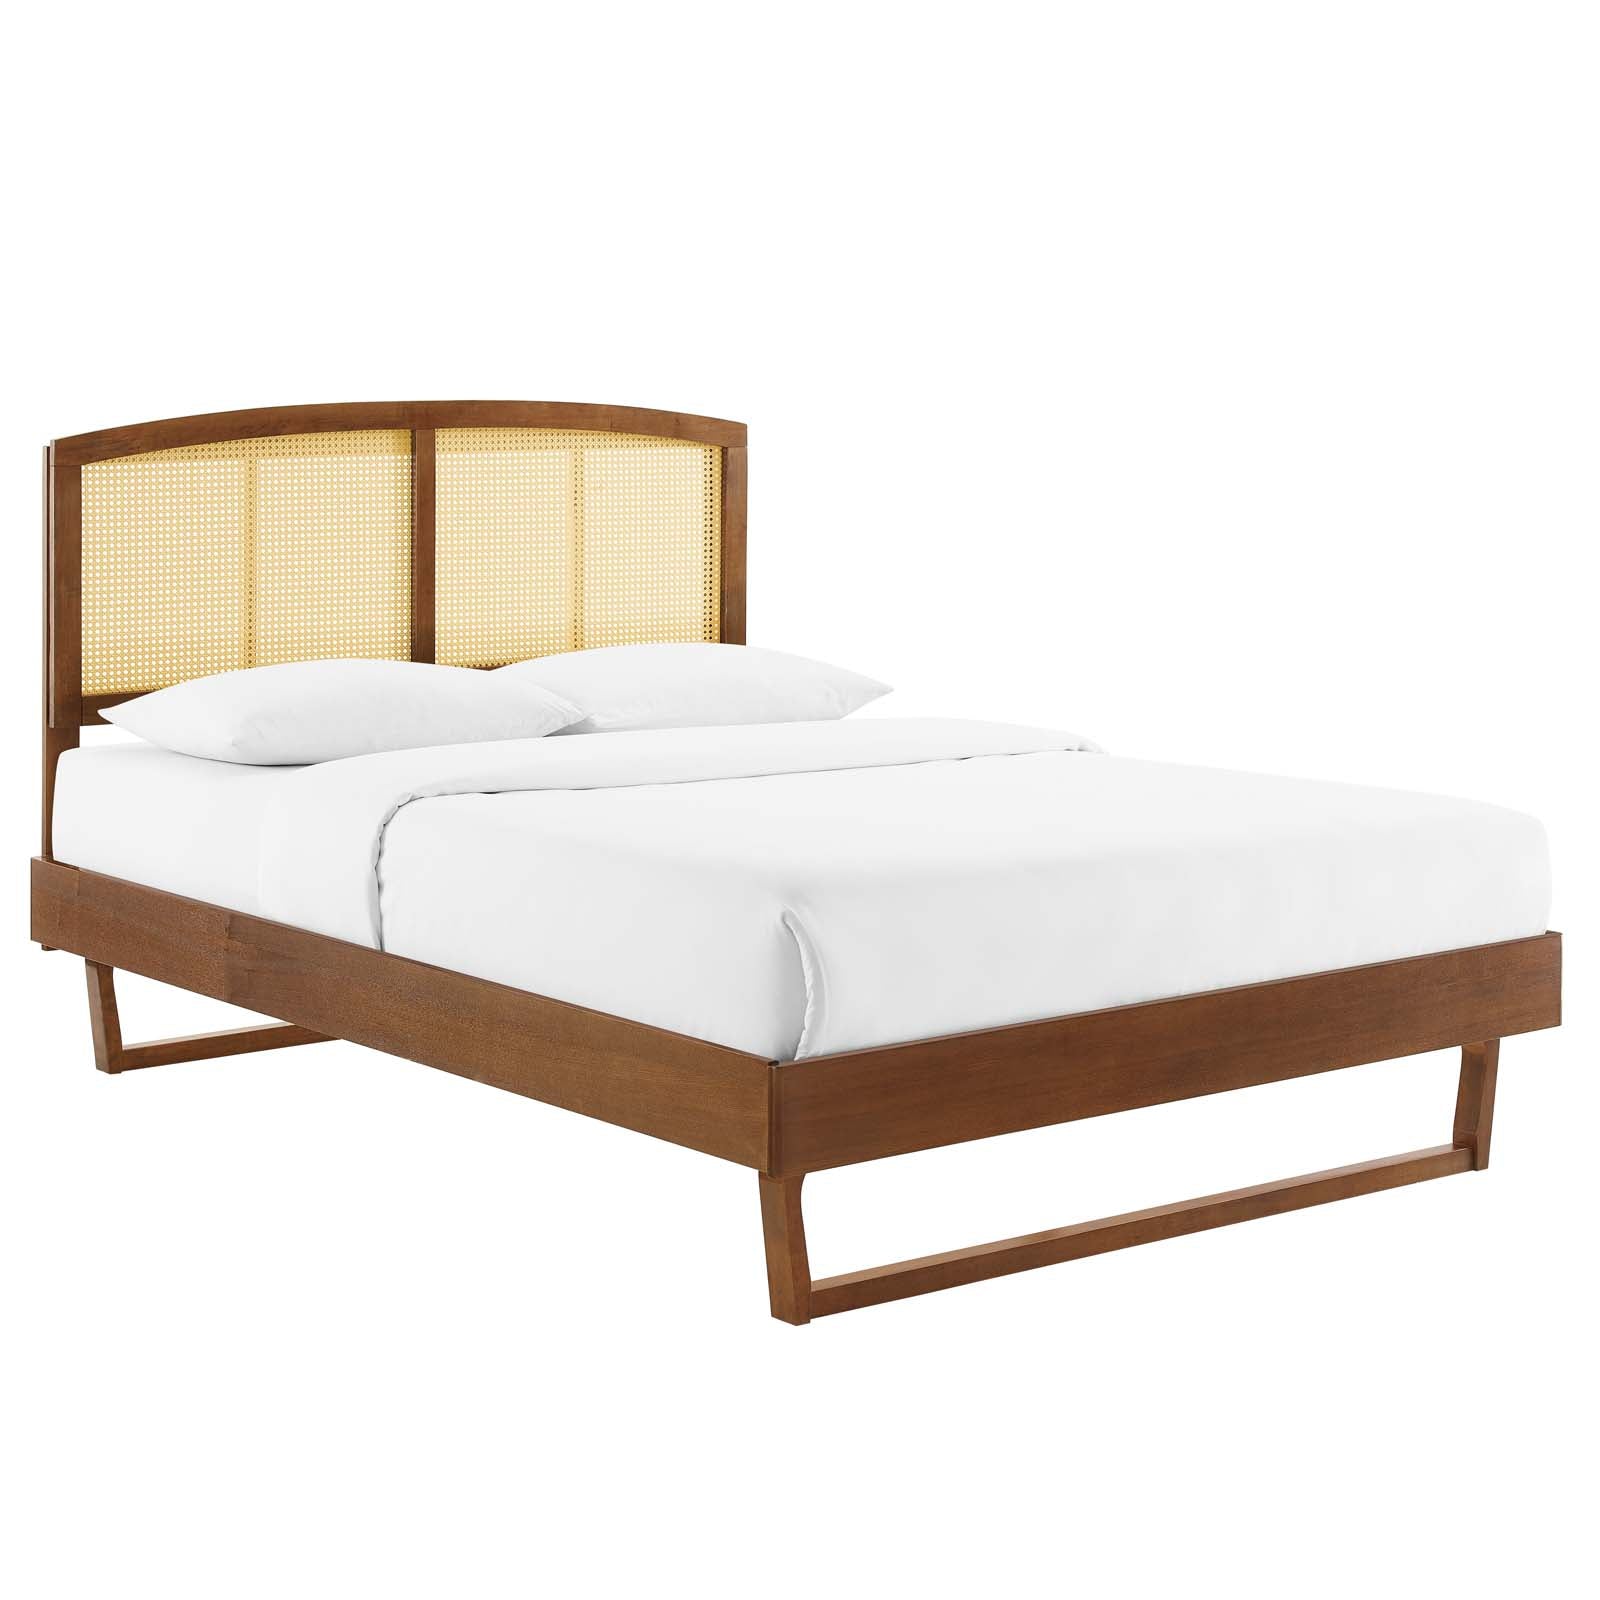 Modway Beds - Sierra-Cane-and-Wood-King-Platform-Bed-With-Angular-Legs-Walnut